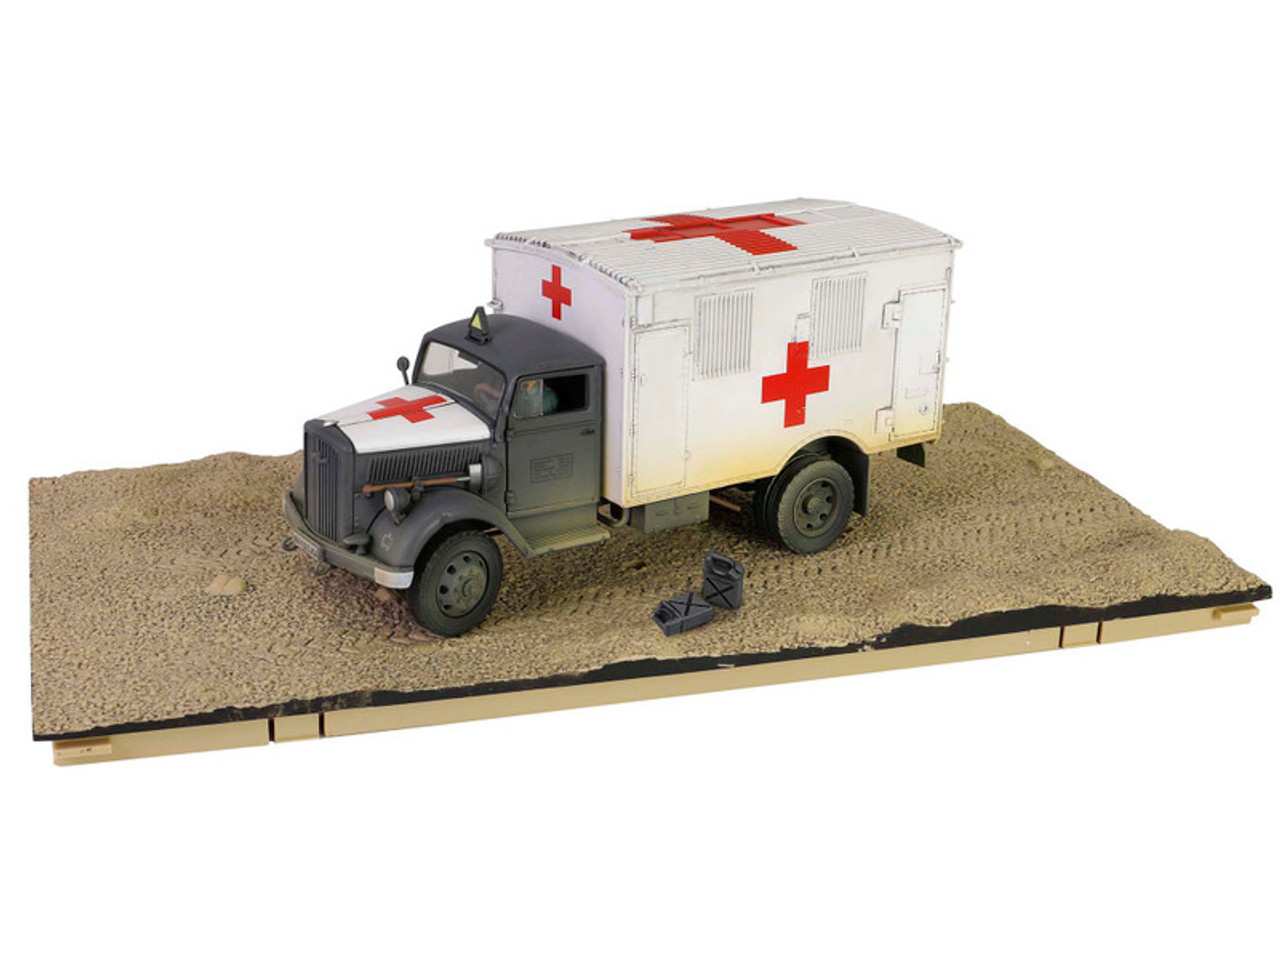 Opel-Blitz Kfz.305 Ambulance Gray and White (Weathered) "German Army" "Armoured Fighting Vehicle" Series 1/32 Diecast Model by Forces of Valor